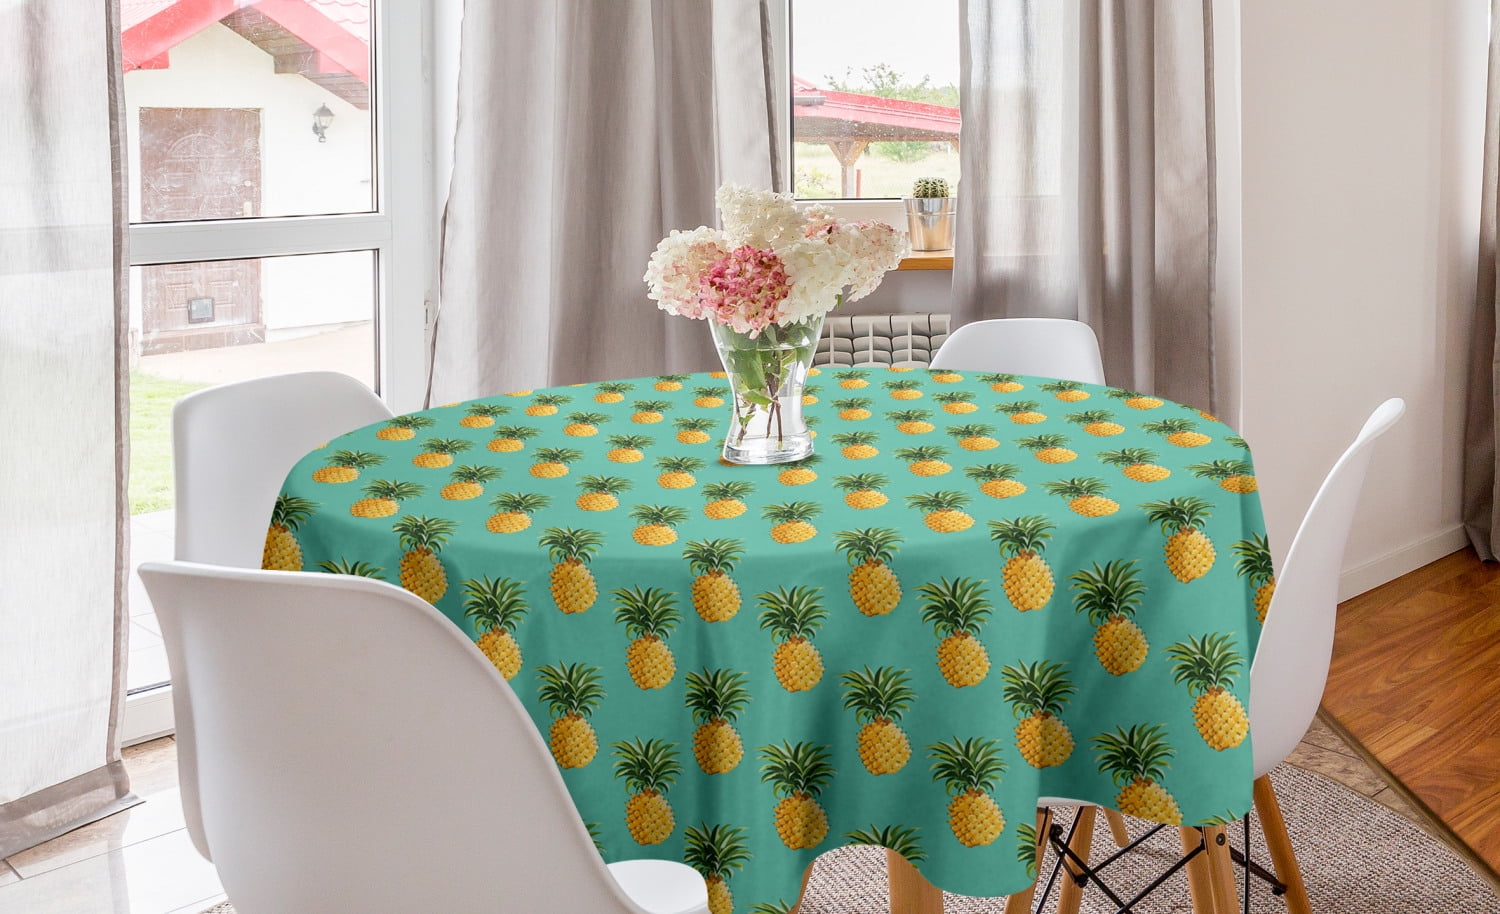 Pineapple Tablecloth Cotton Linen Table Cloth Cover Dining Kitchen Home Decor 